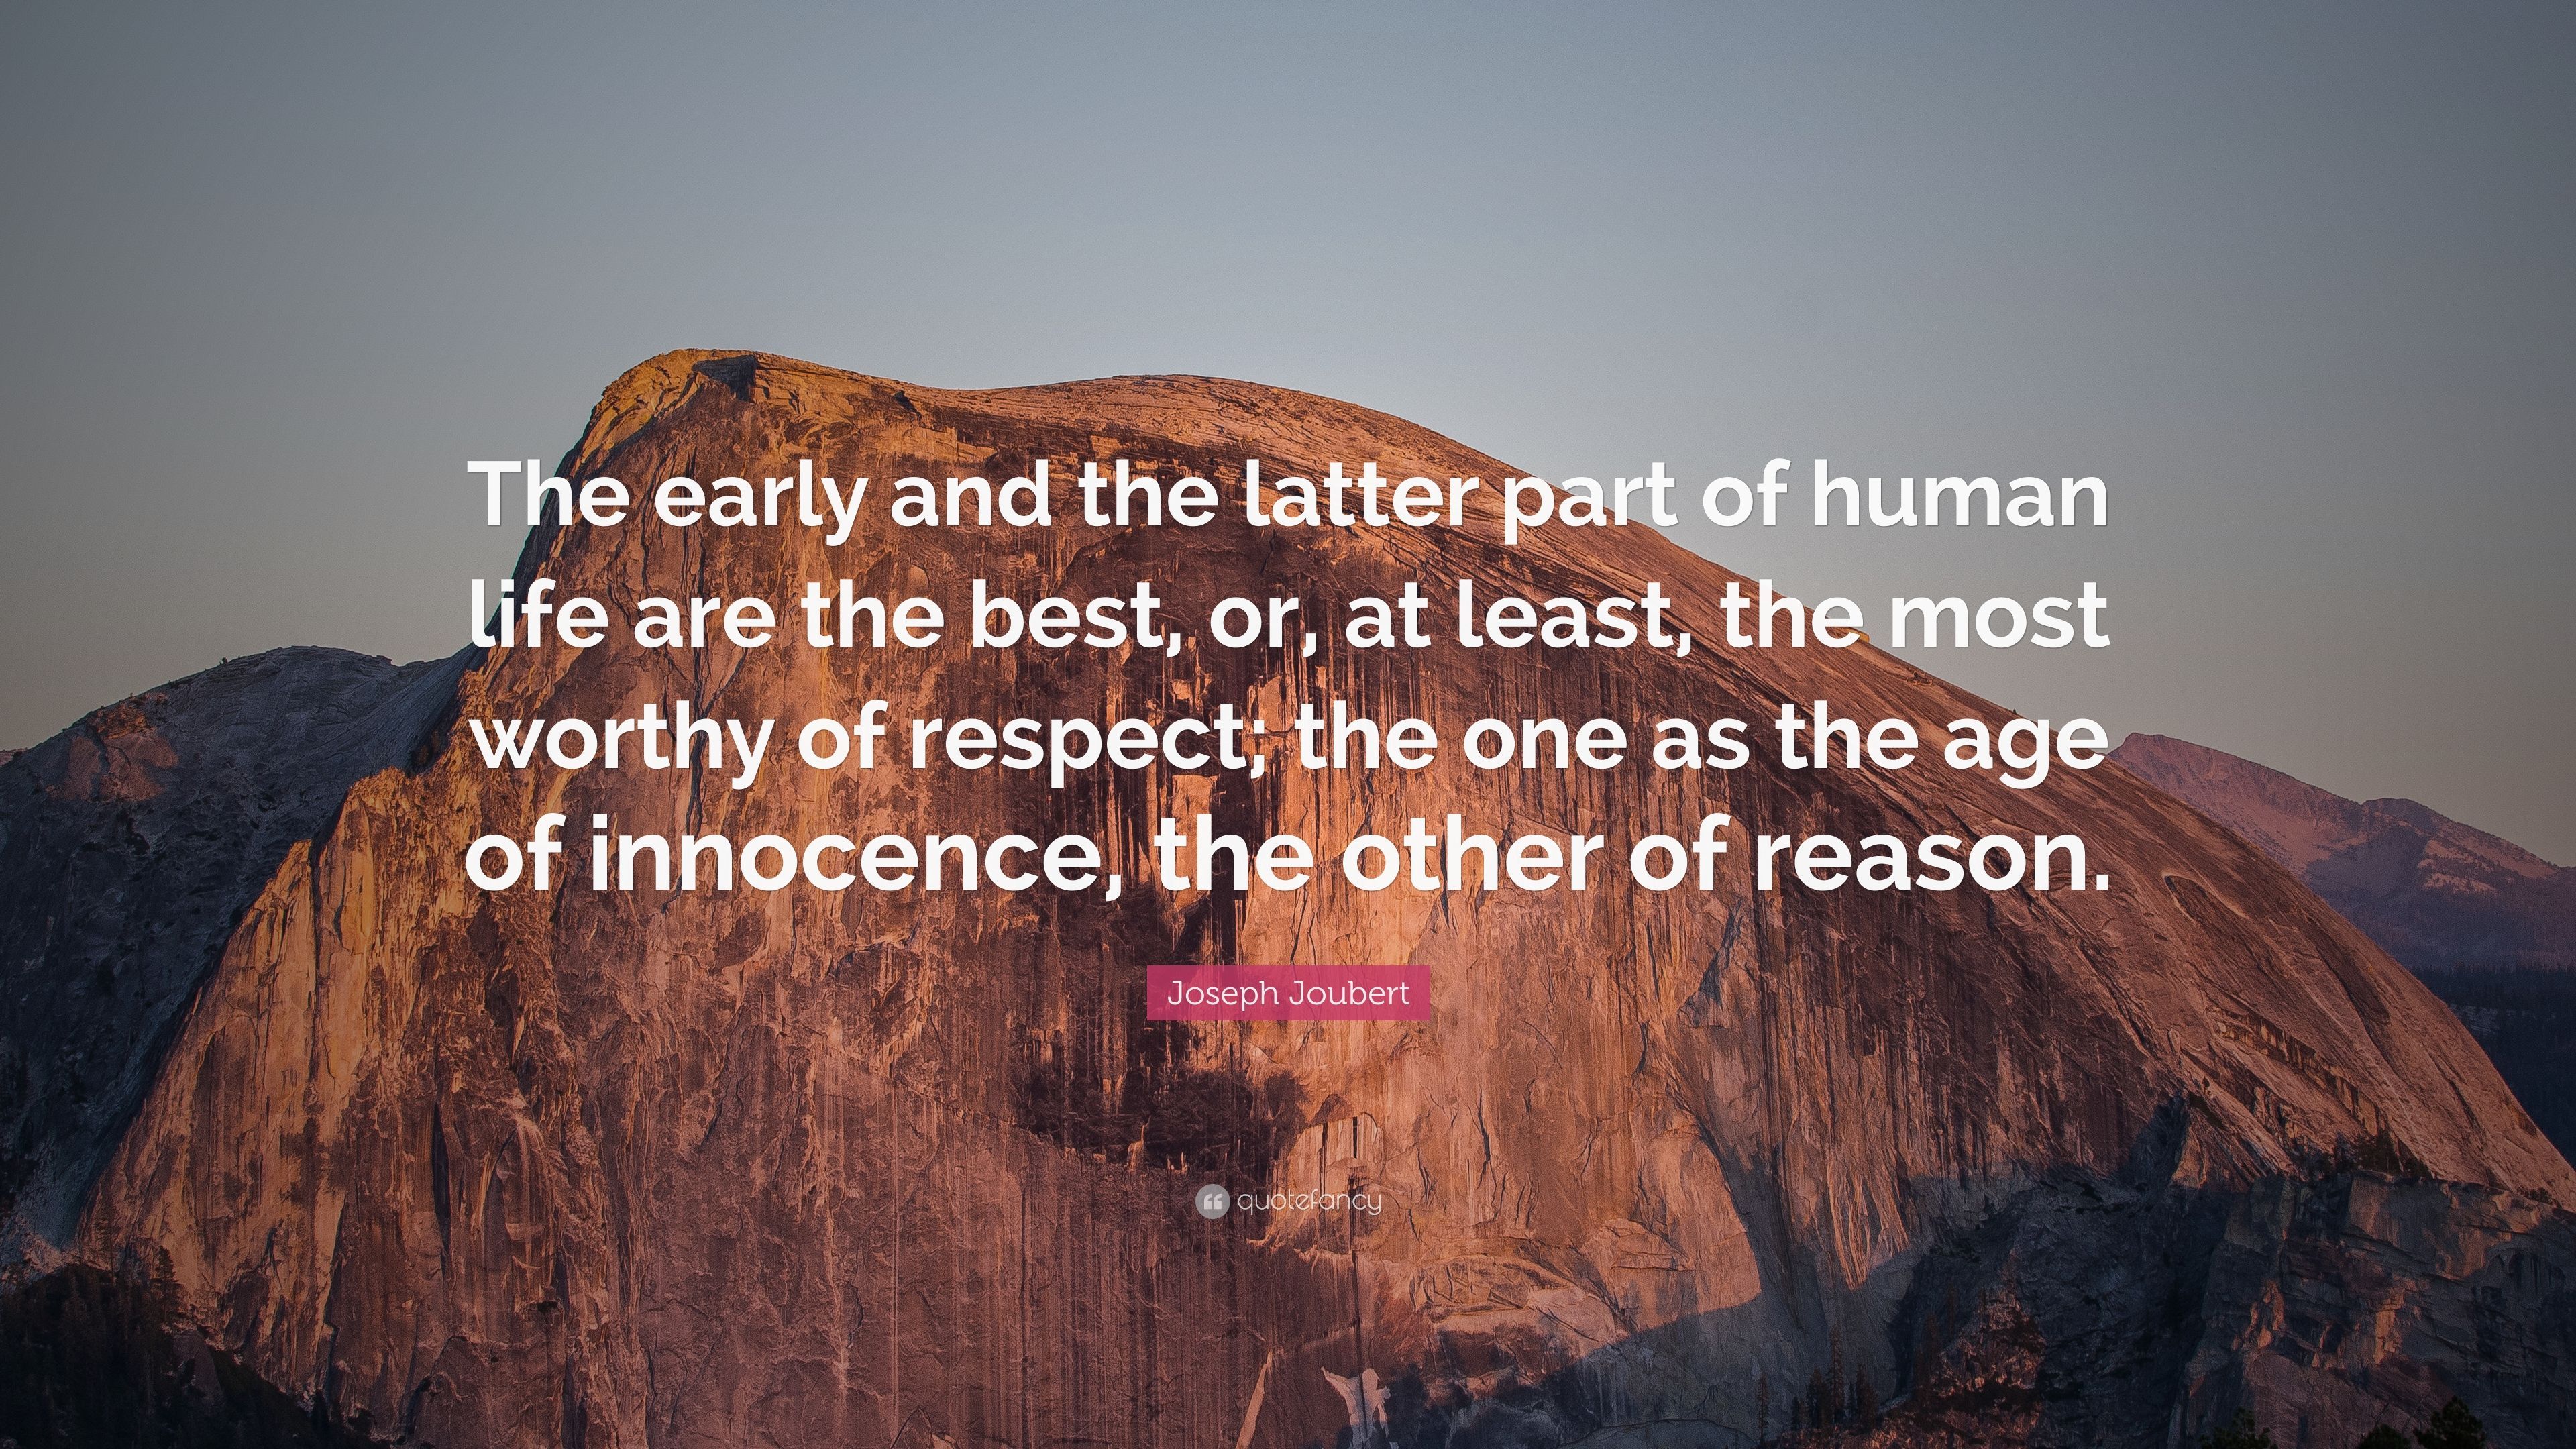 Joseph Joubert Quote: “The early and the latter part of human life